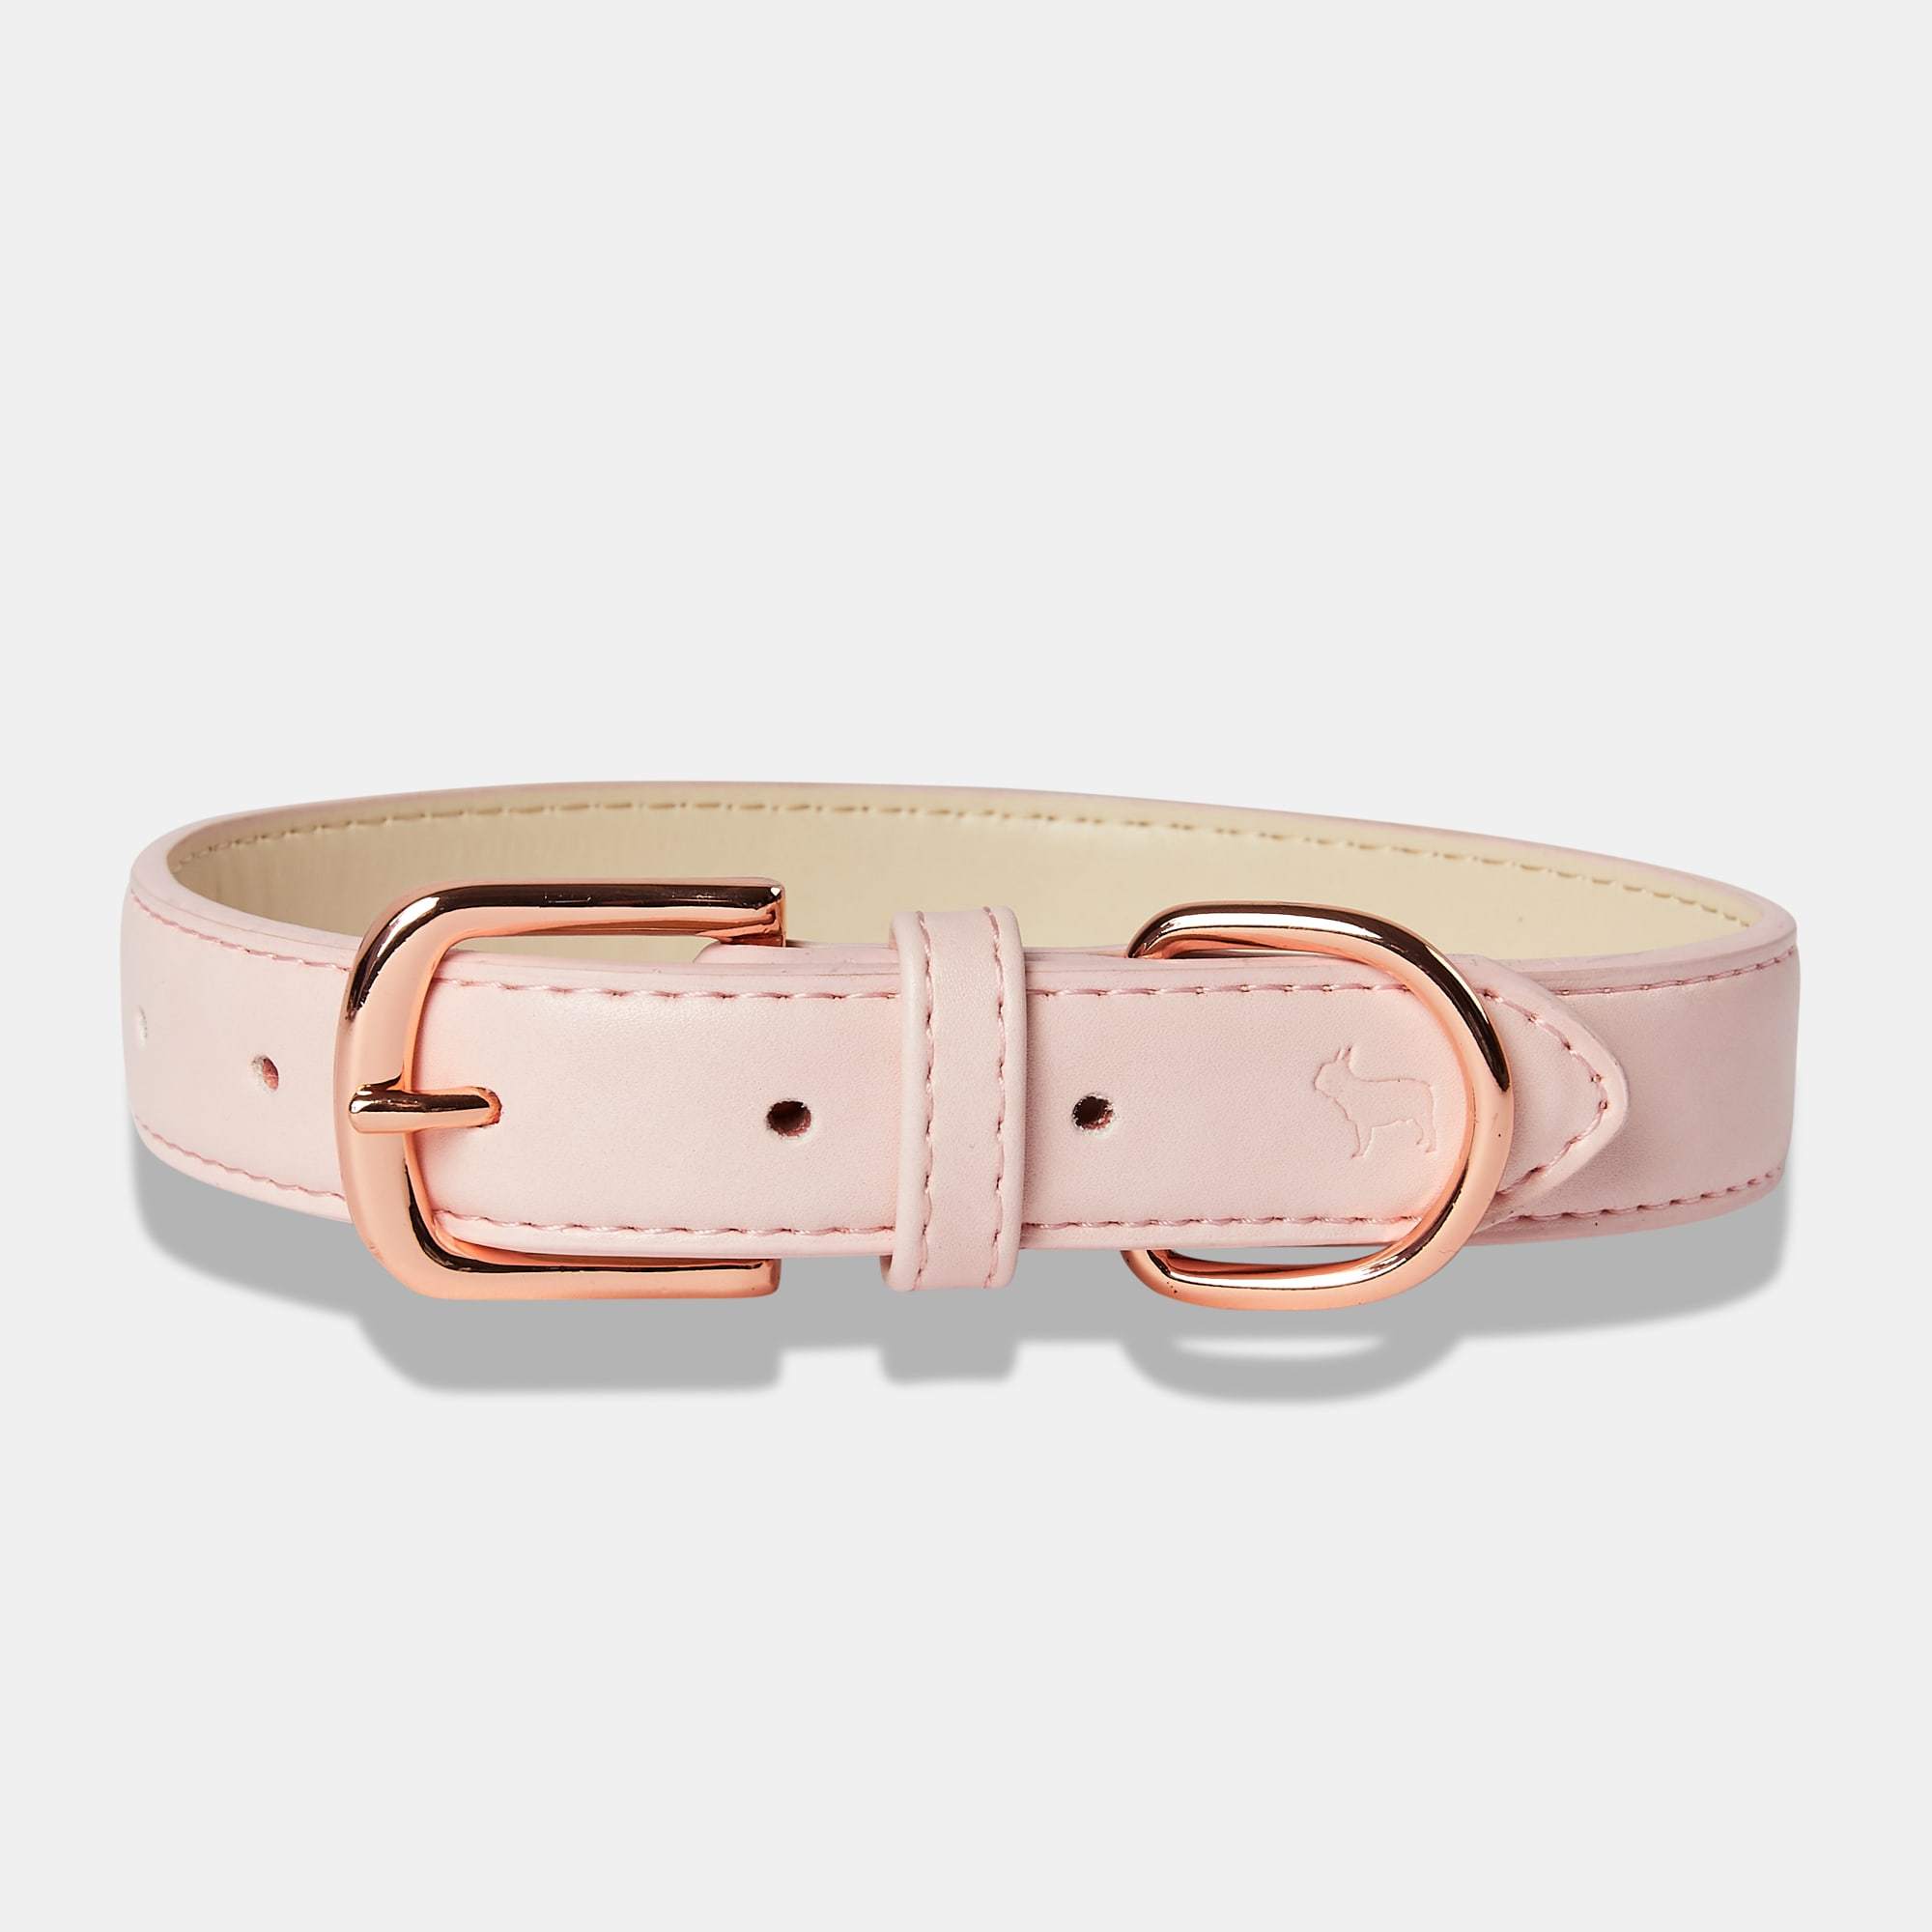 Blush Pink Dog Collar with Rose Gold Buckles